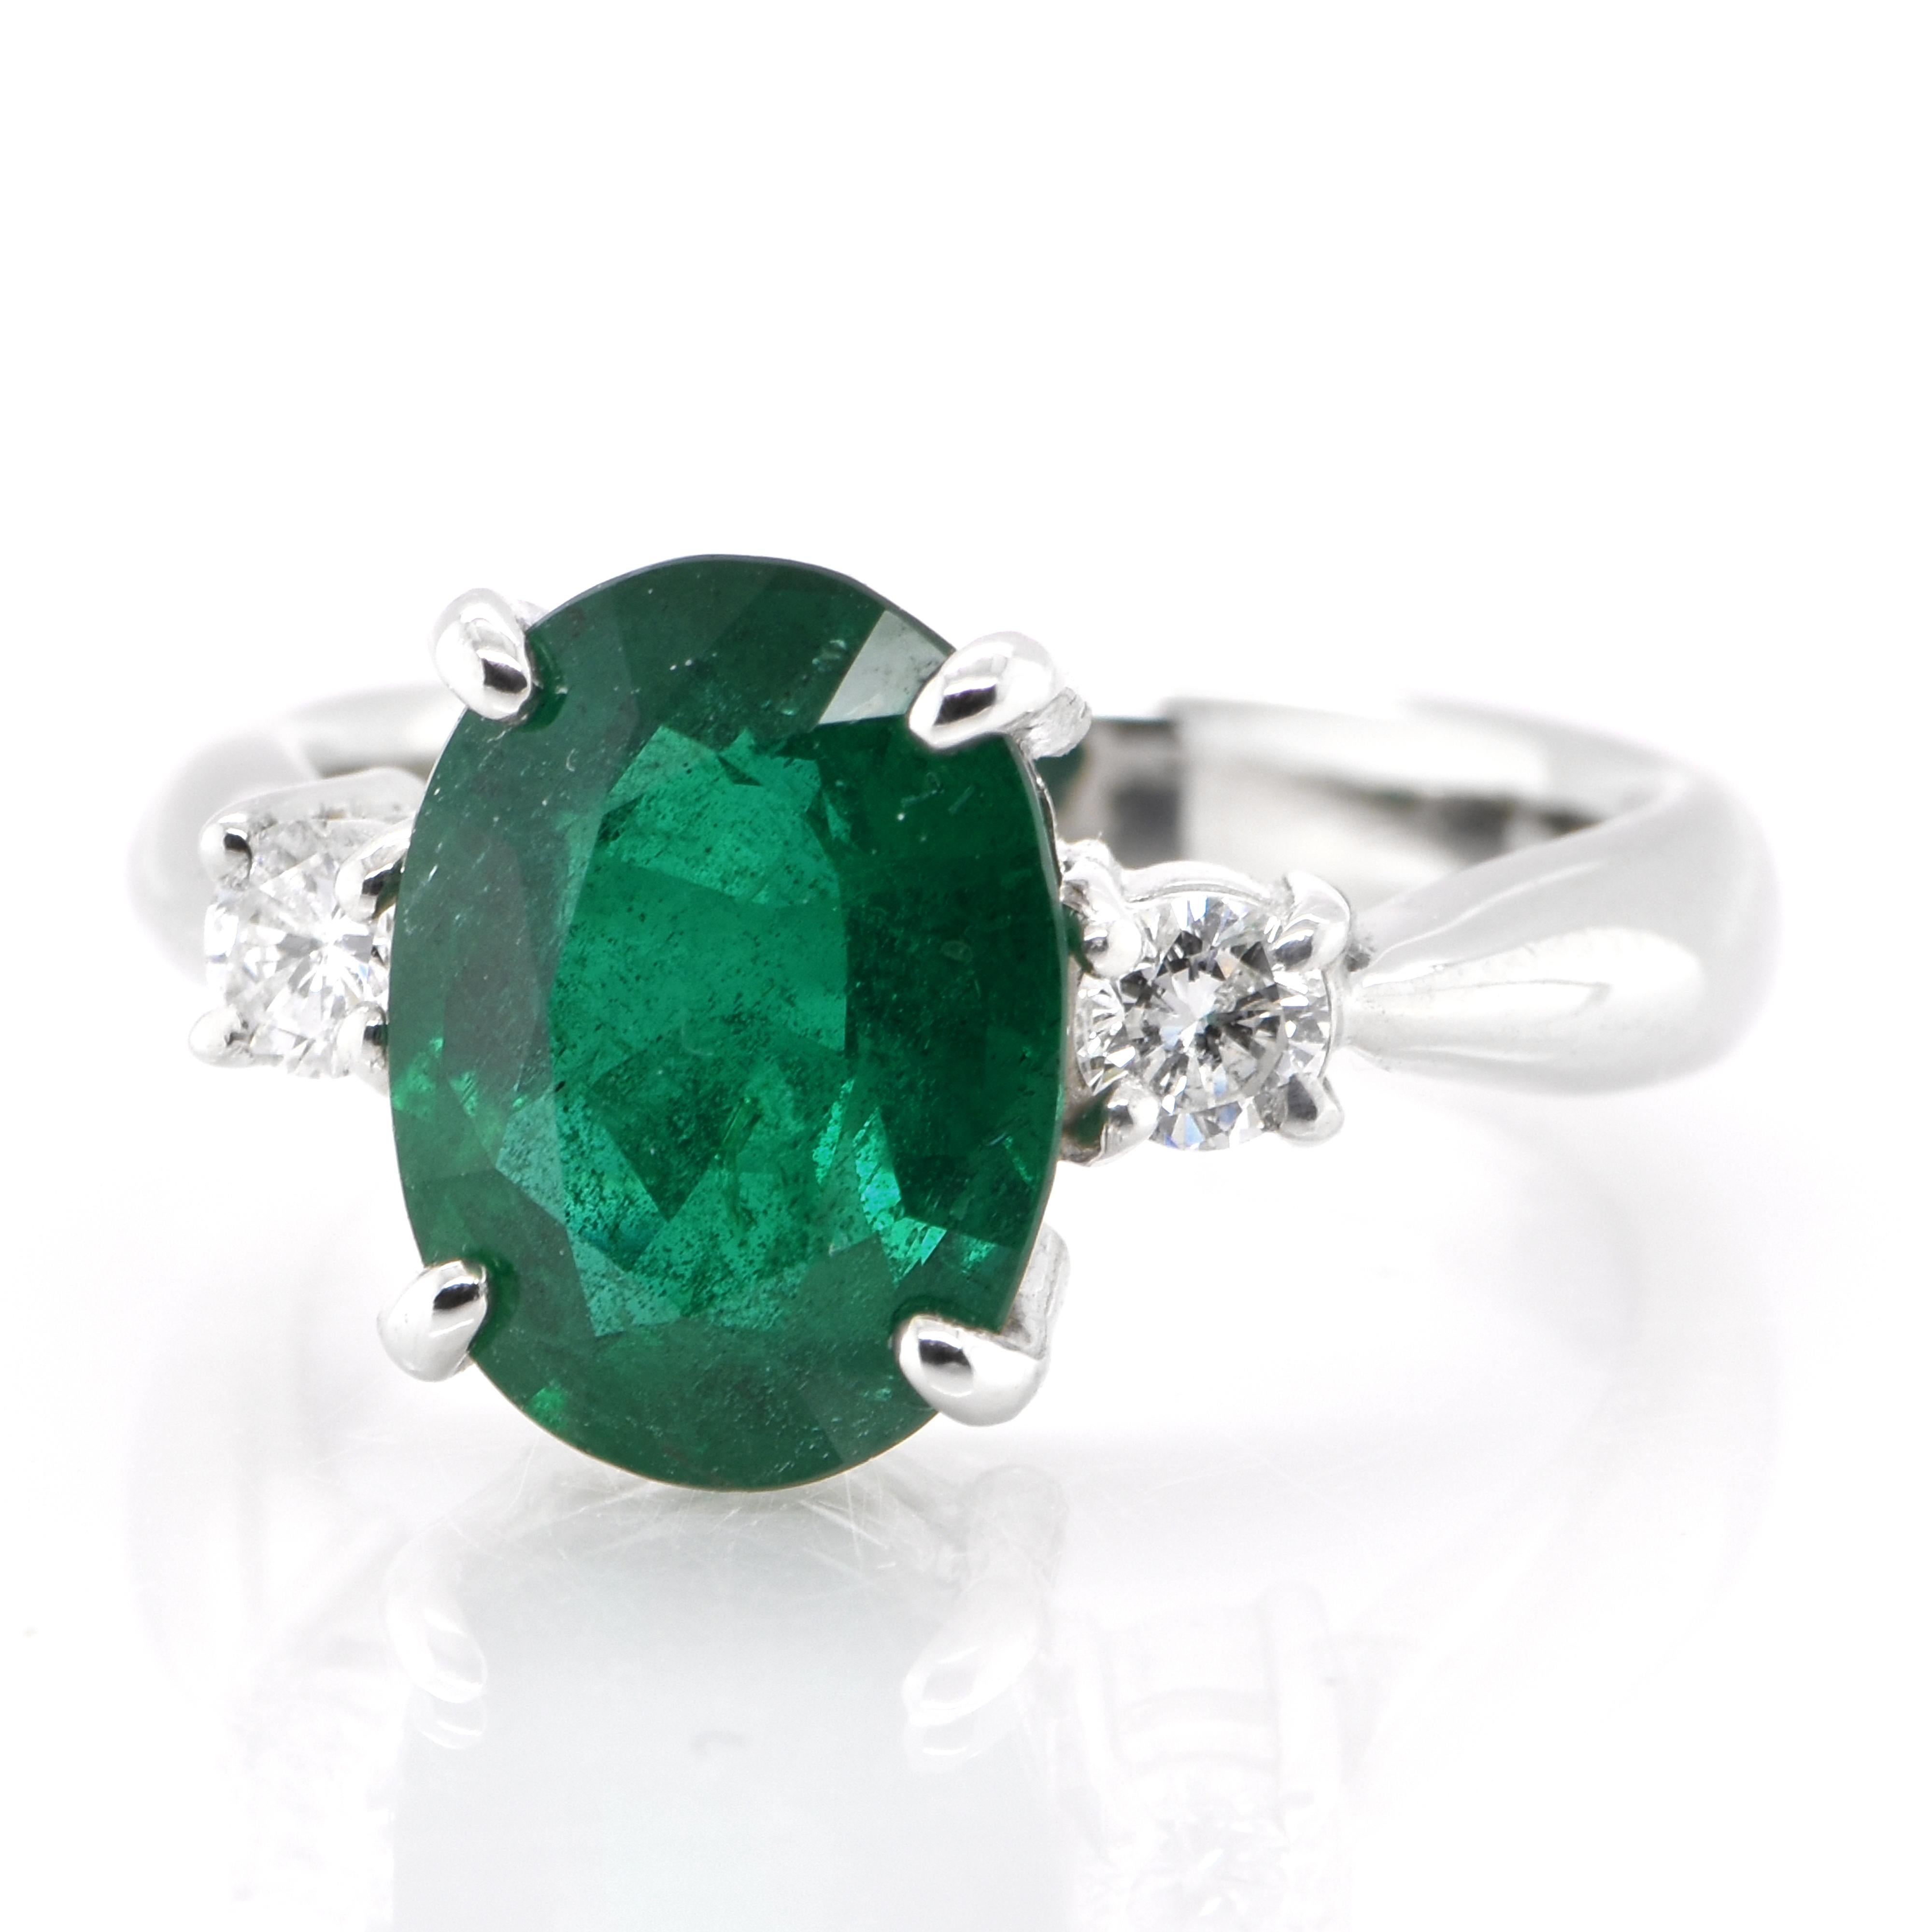 A stunning ring featuring a 2.809 Carat Natural Emerald and 0.18 Carats of Diamond Accents set in Platinum. People have admired emerald’s green for thousands of years. Emeralds have always been associated with the lushest landscapes and the richest